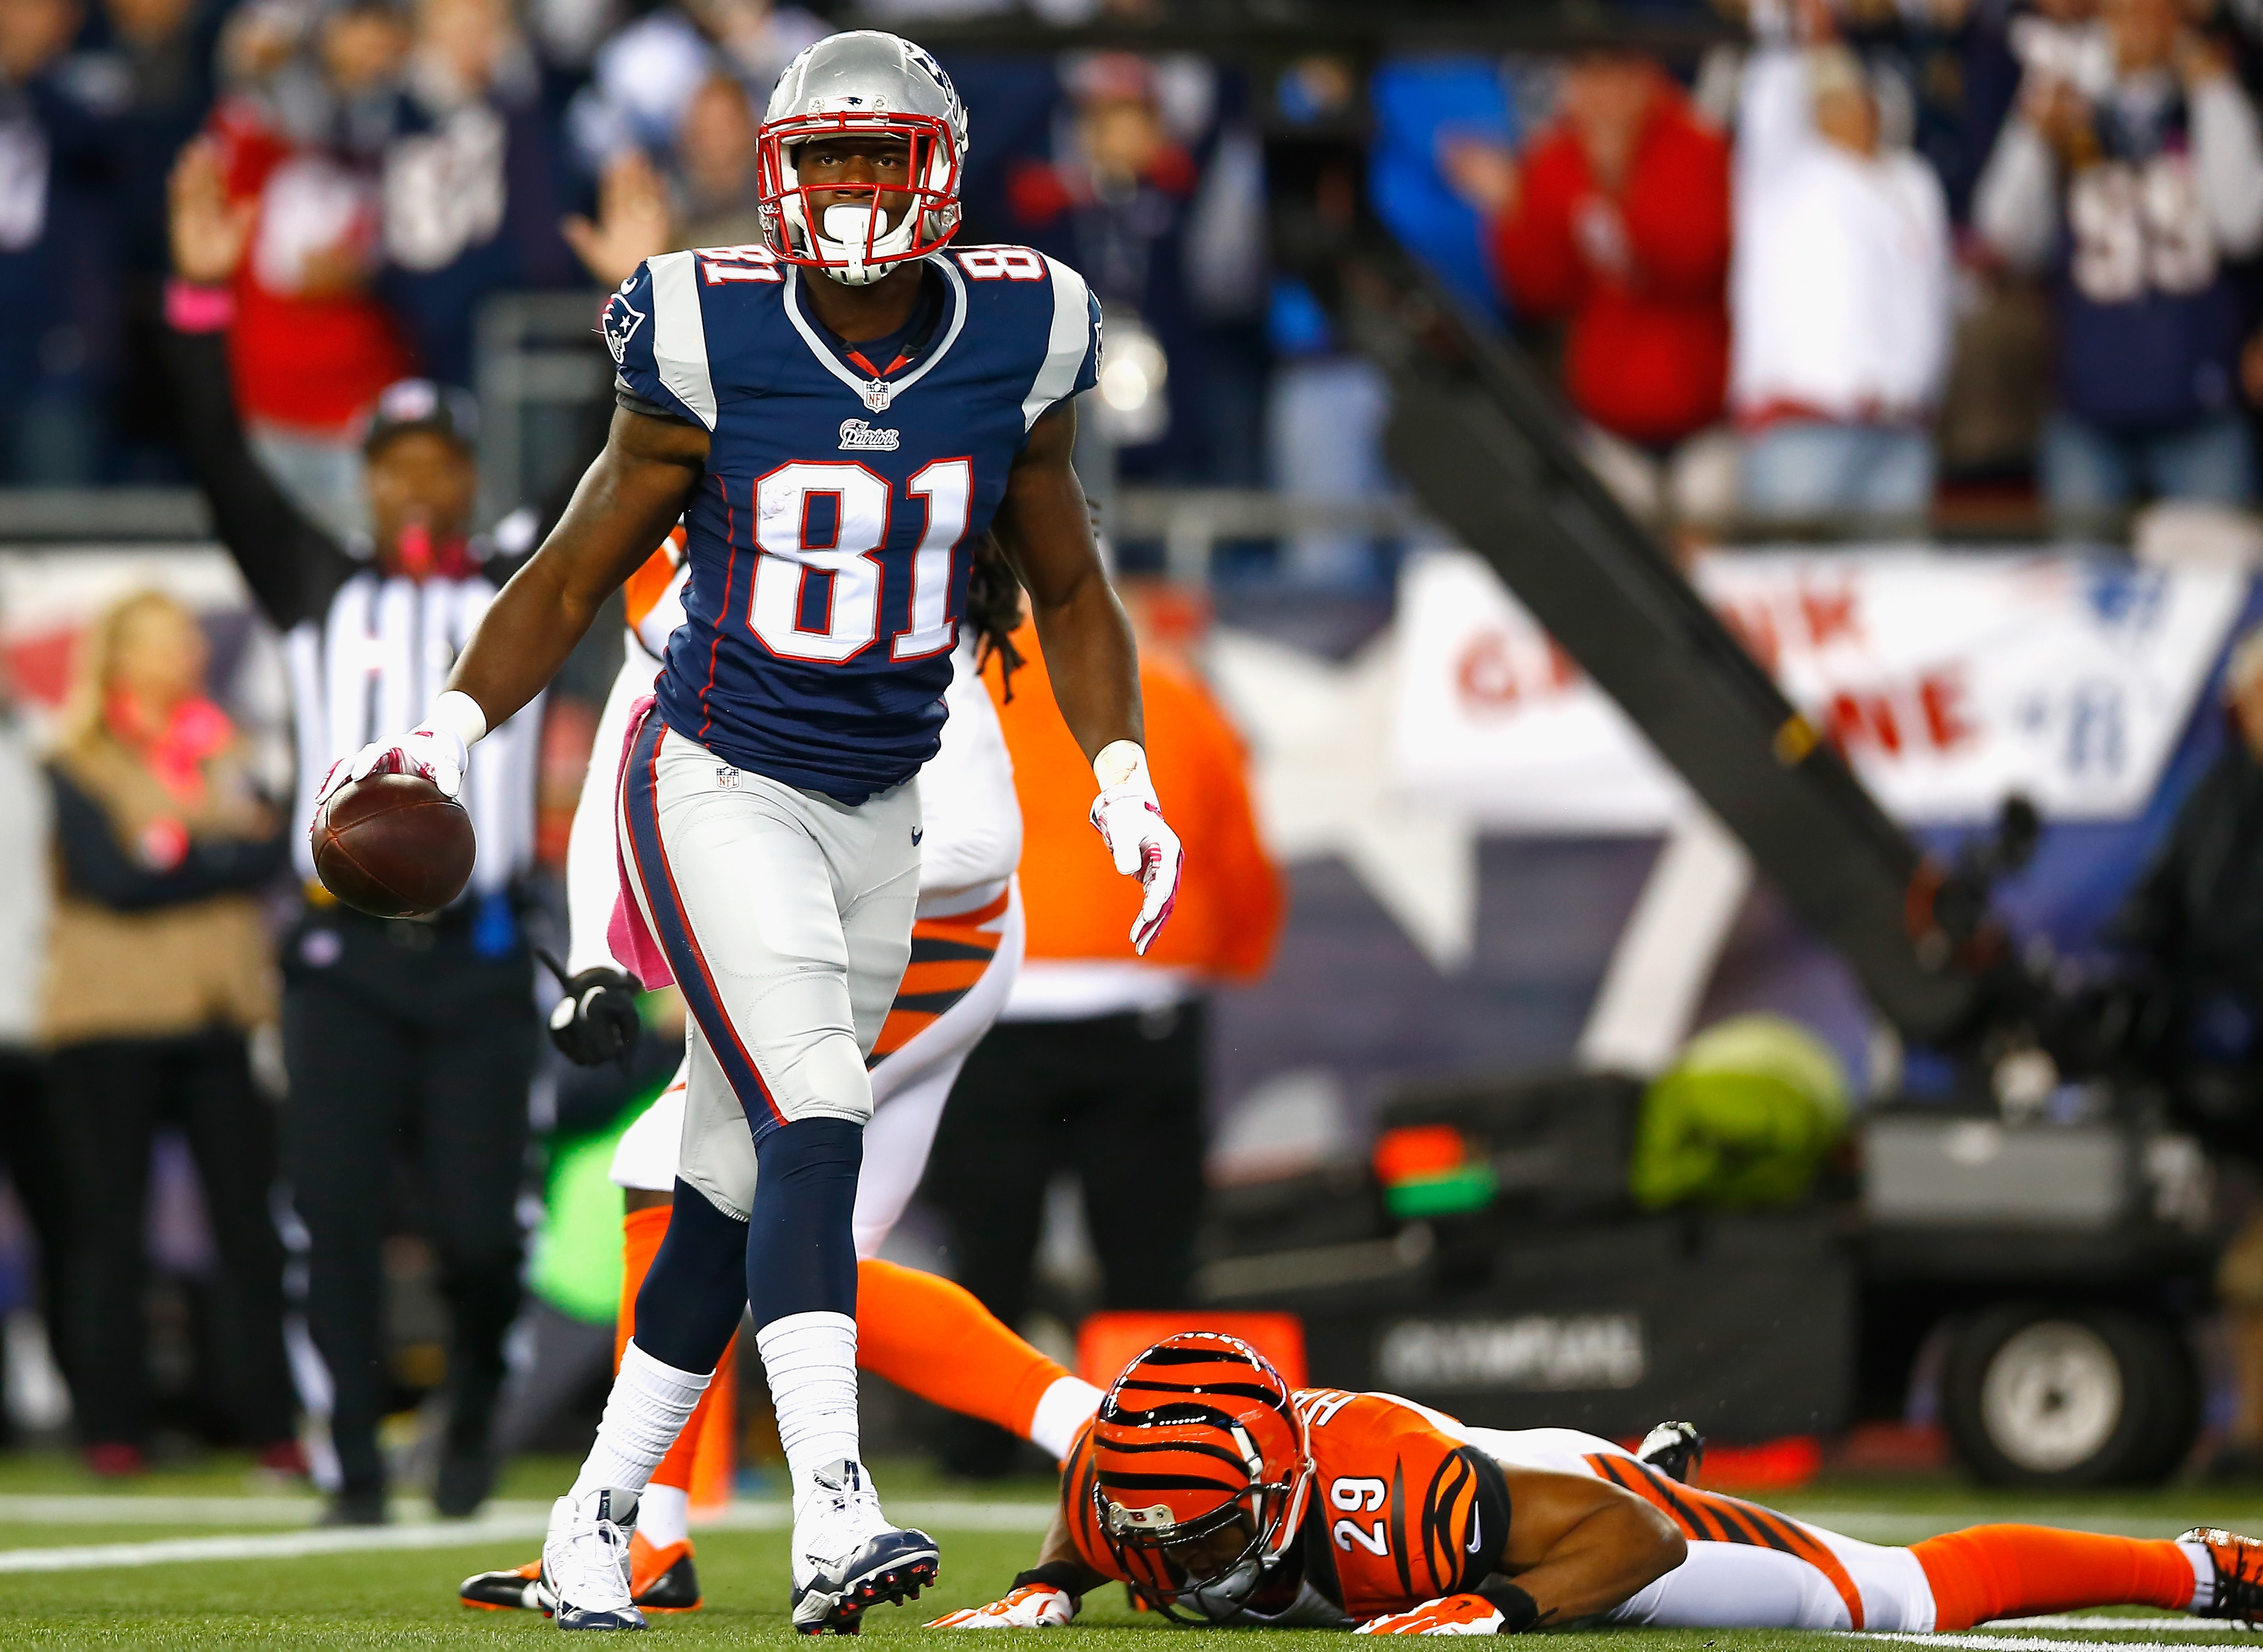 Tim Wright #81 of the New England Patriots celebrates after scoring a touchdown against the Cincinnati Bengals on October 5, 2014.  (Photo by Jared Wickerham/Getty Images)